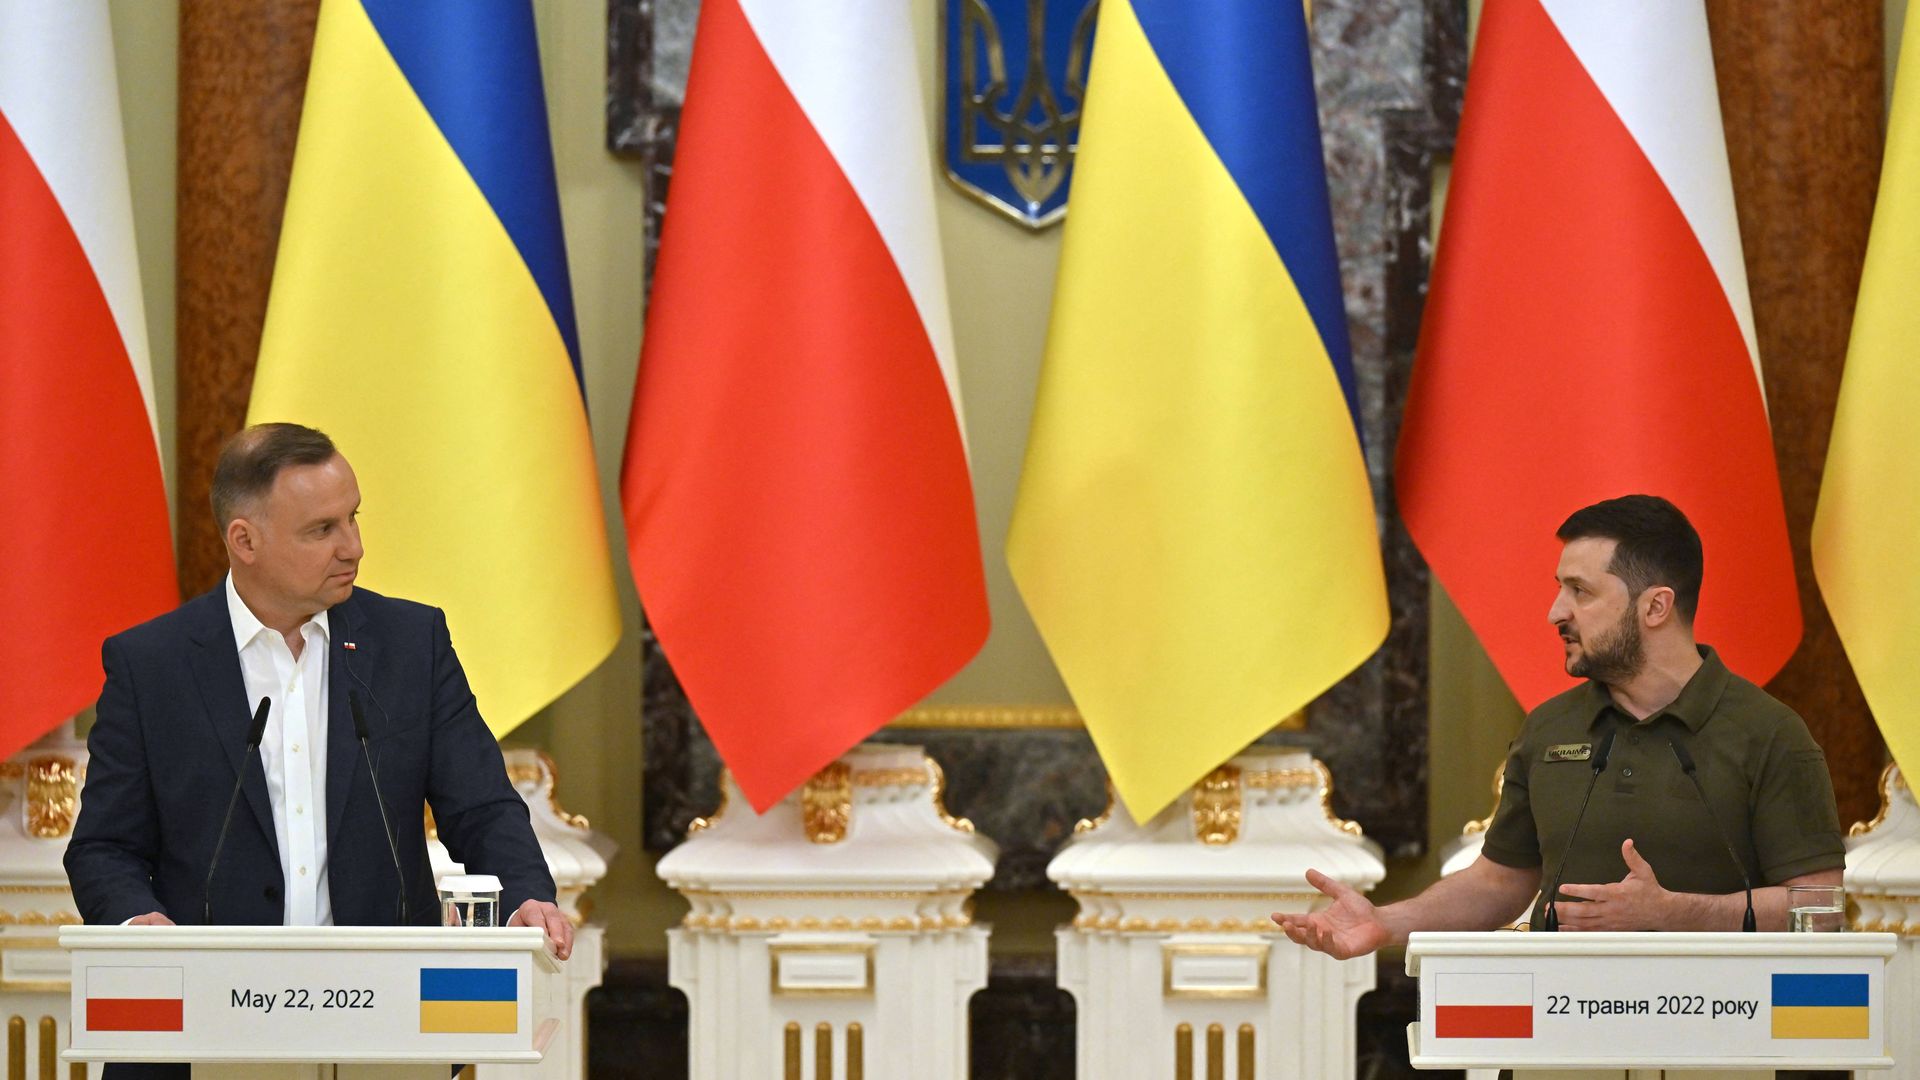 Ukrainian President Volodymyr Zelensky (R) and his Polish counterpart Andrzej Duda give a press-conference